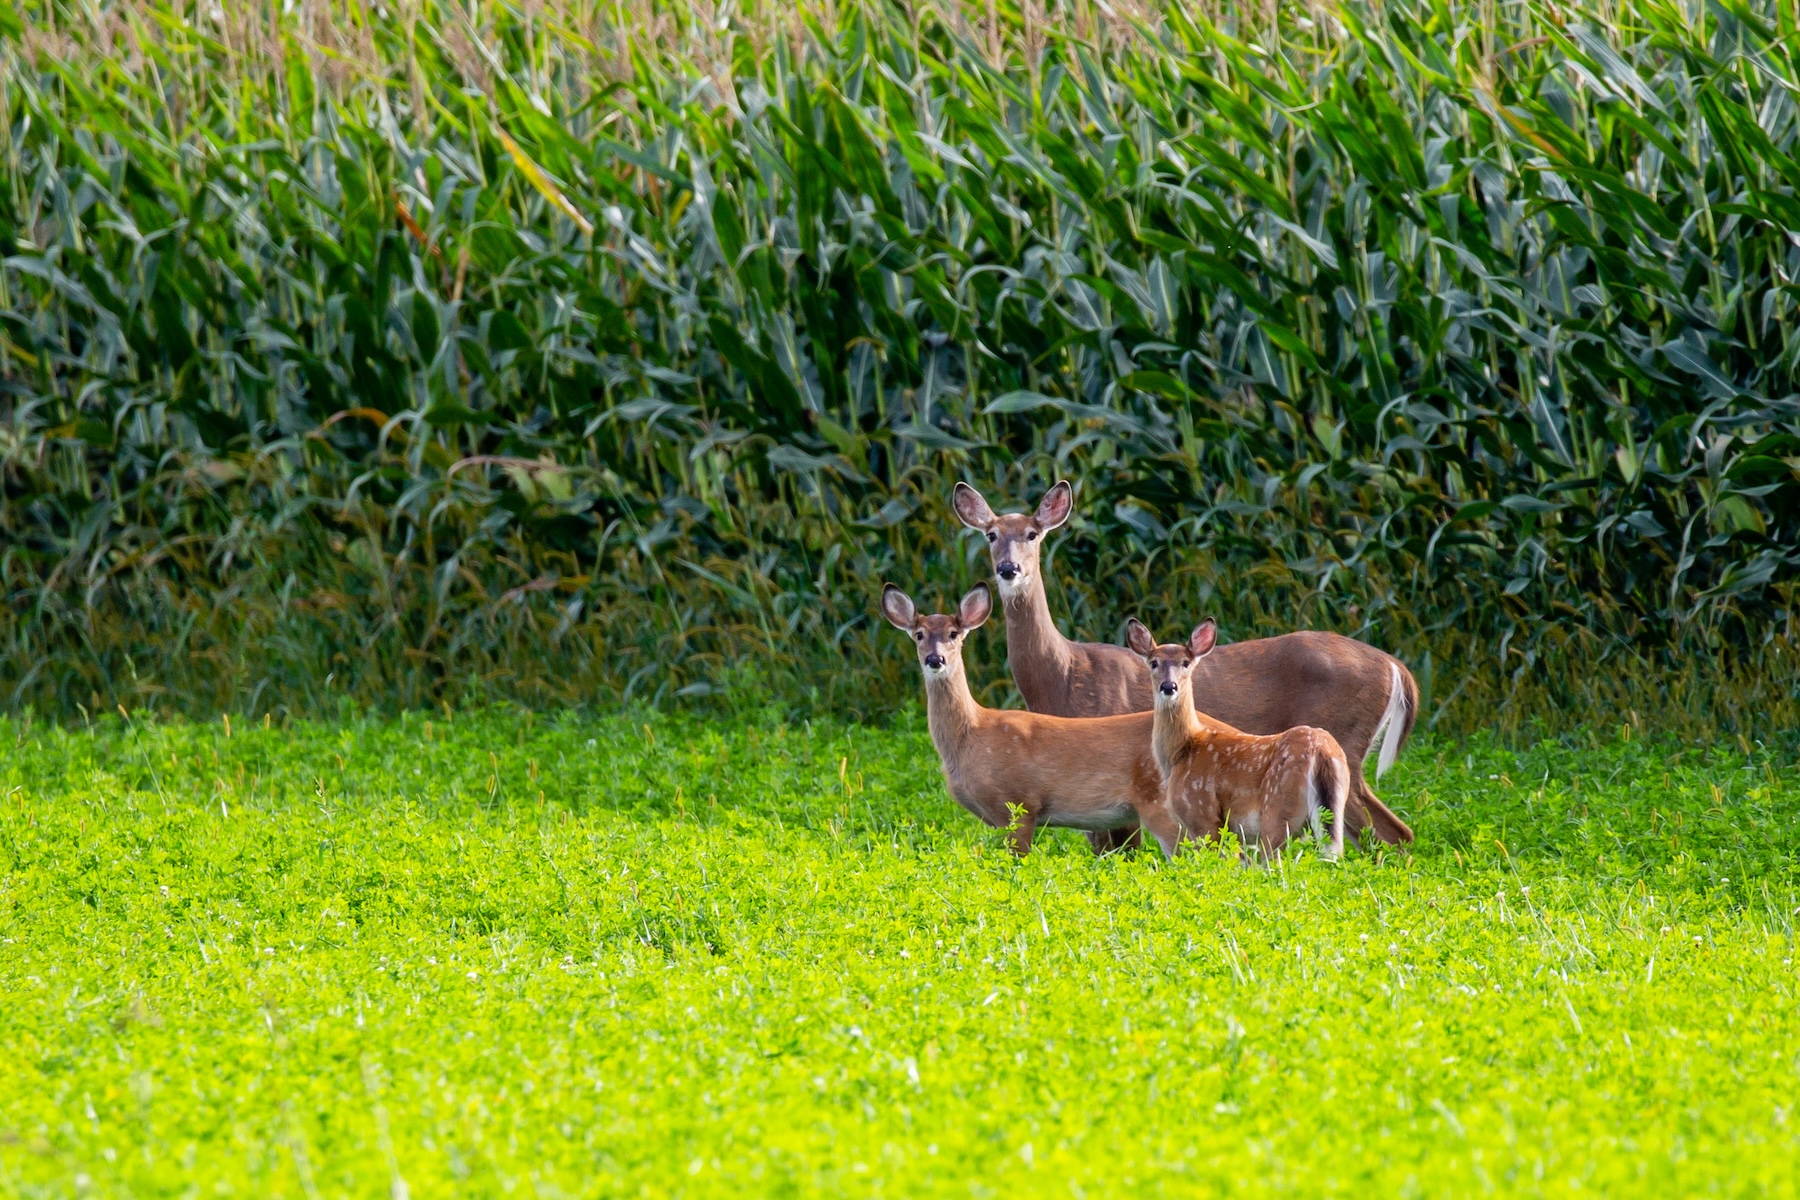 Whitetail deer in a cornfield.